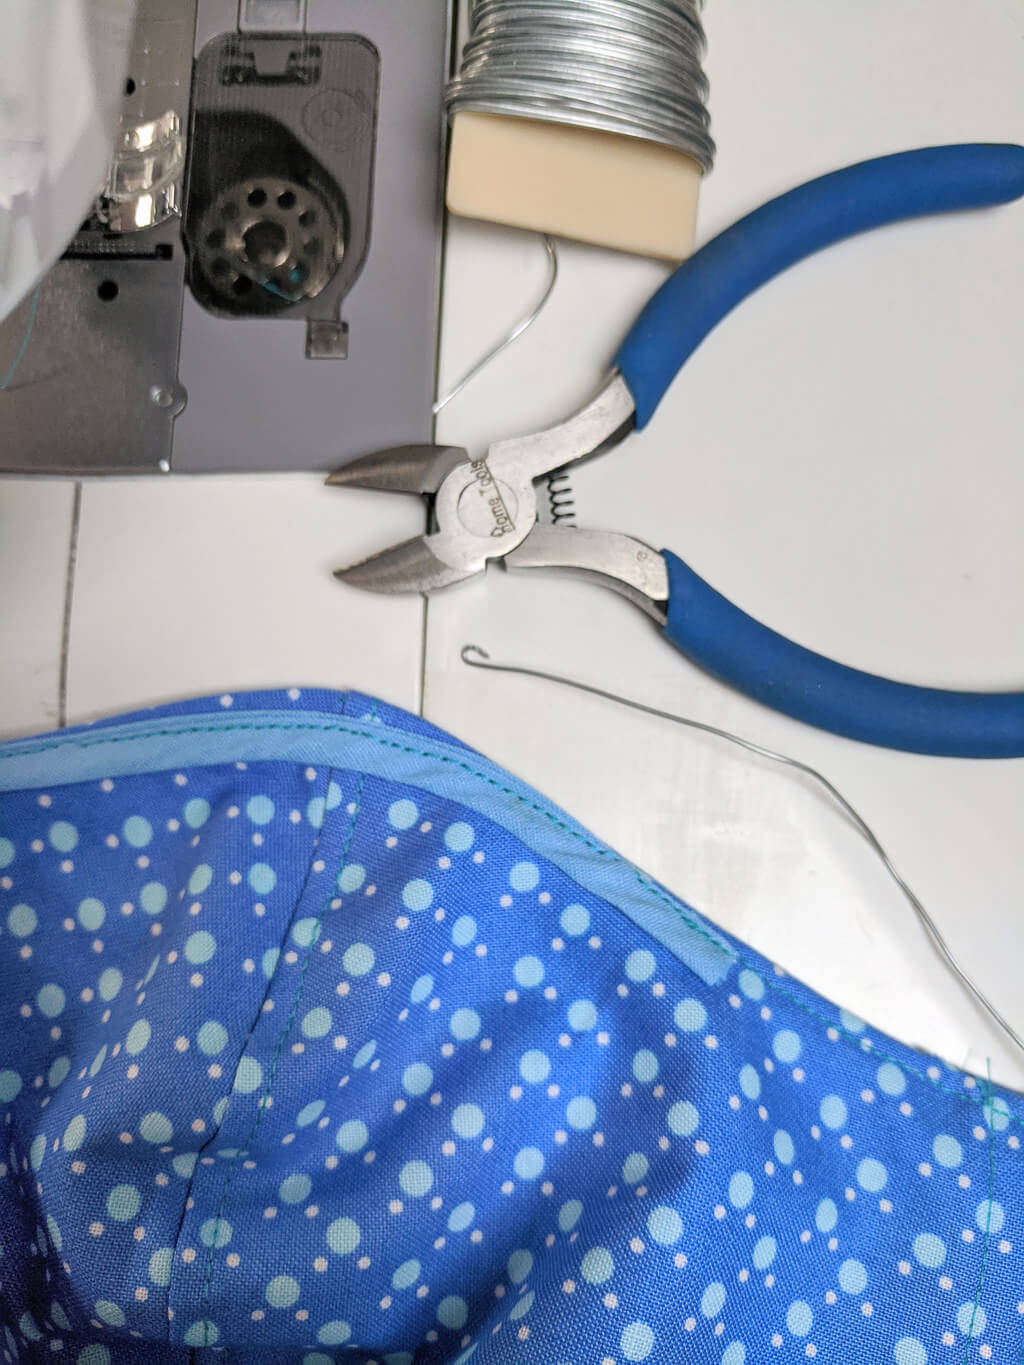 Curving end of wire to avoid poking in a fabric face mask